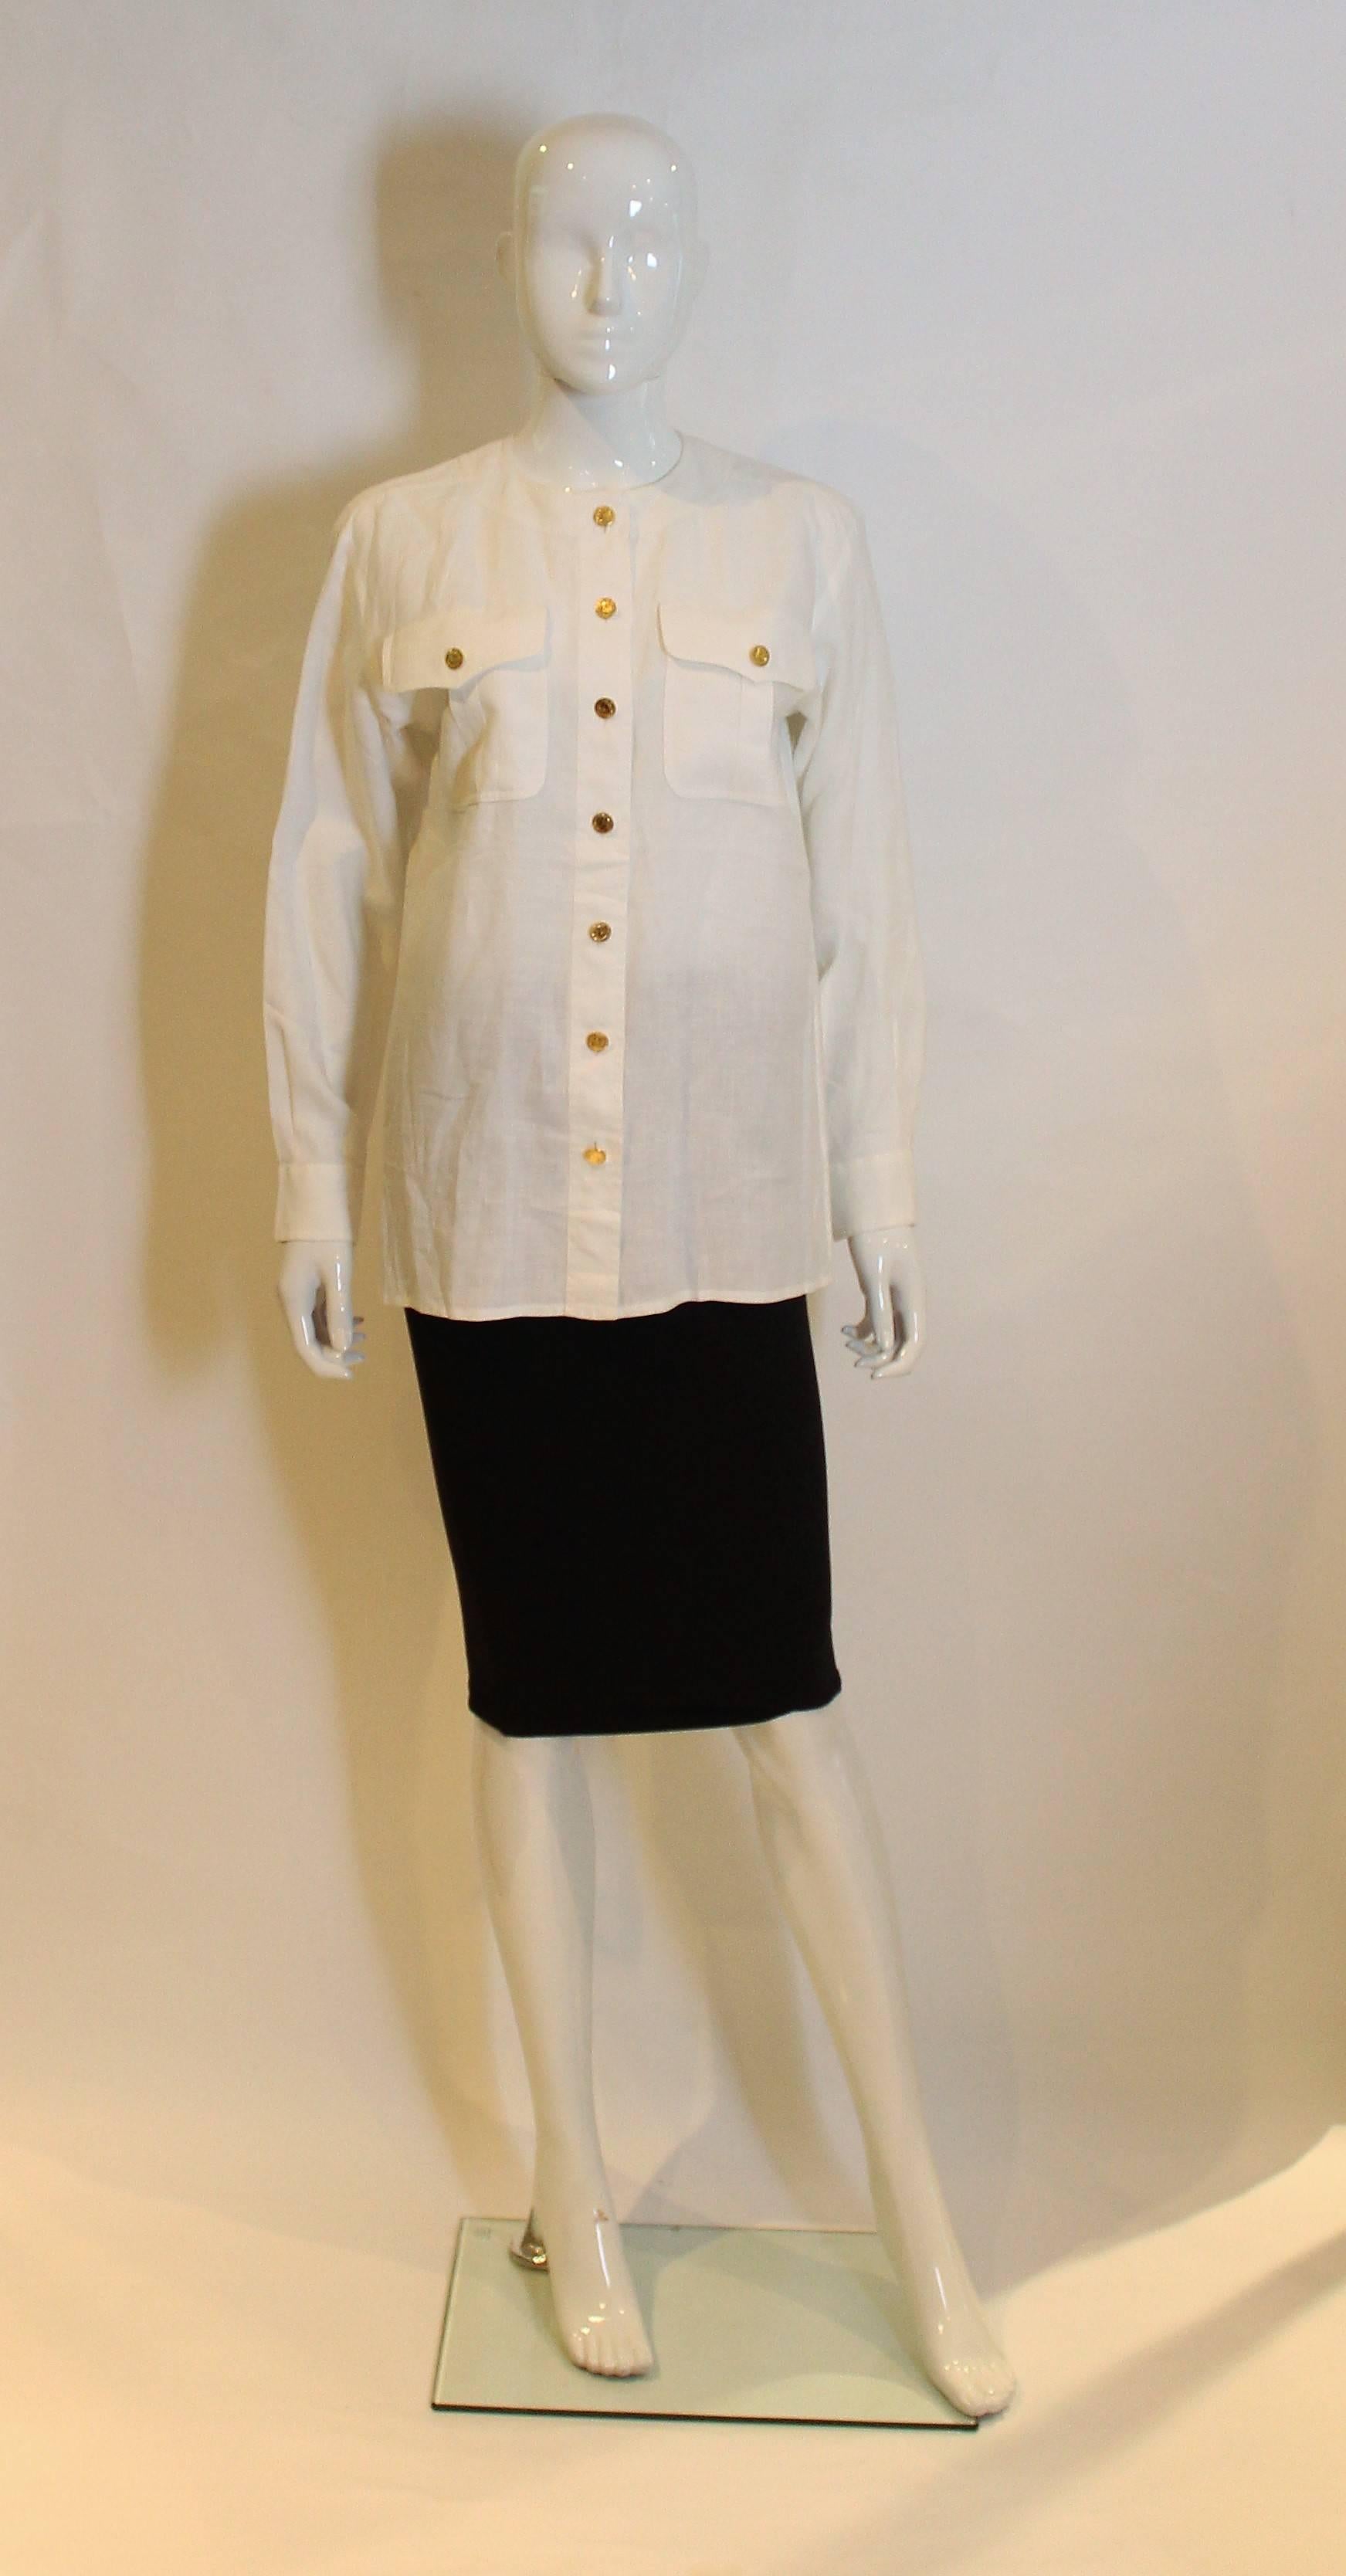 A great shirt for Spring /Summer by Yves Saint Laurent, Rive Gauche. In a white linen, this shirt has a round neckline, 2 breast pockets with gold buttons, a seven button opening at the front and a button on each cuff.